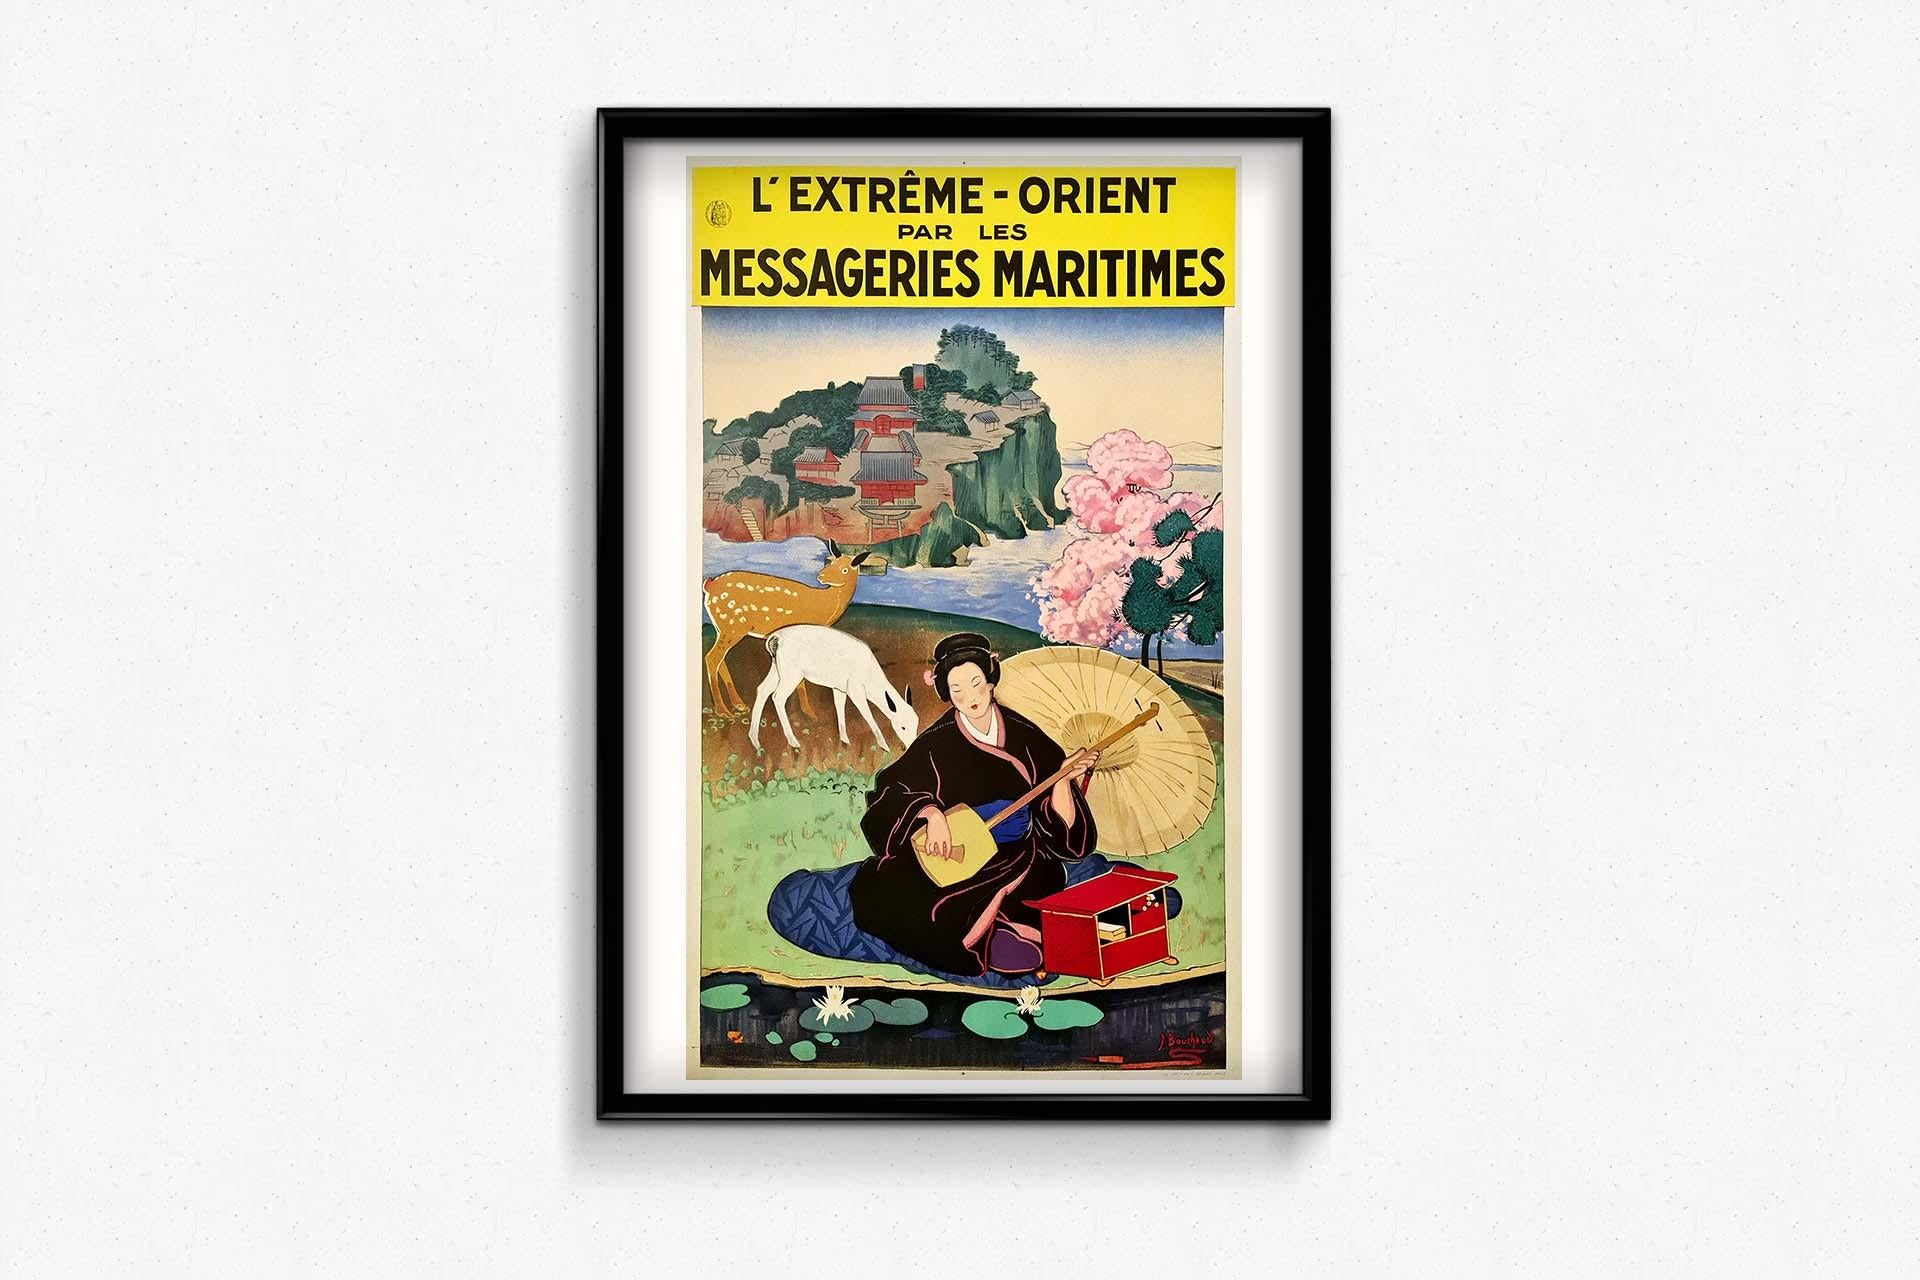 Beautiful poster of 1925 created by Jean Bouchaud (1891 - 1977) for the voyages in extreme east with the messageries maritimes.

Jean Bouchaud is a painter traveler, both artist, adventurer and reporter. Jean Bouchaud travels through North Africa,